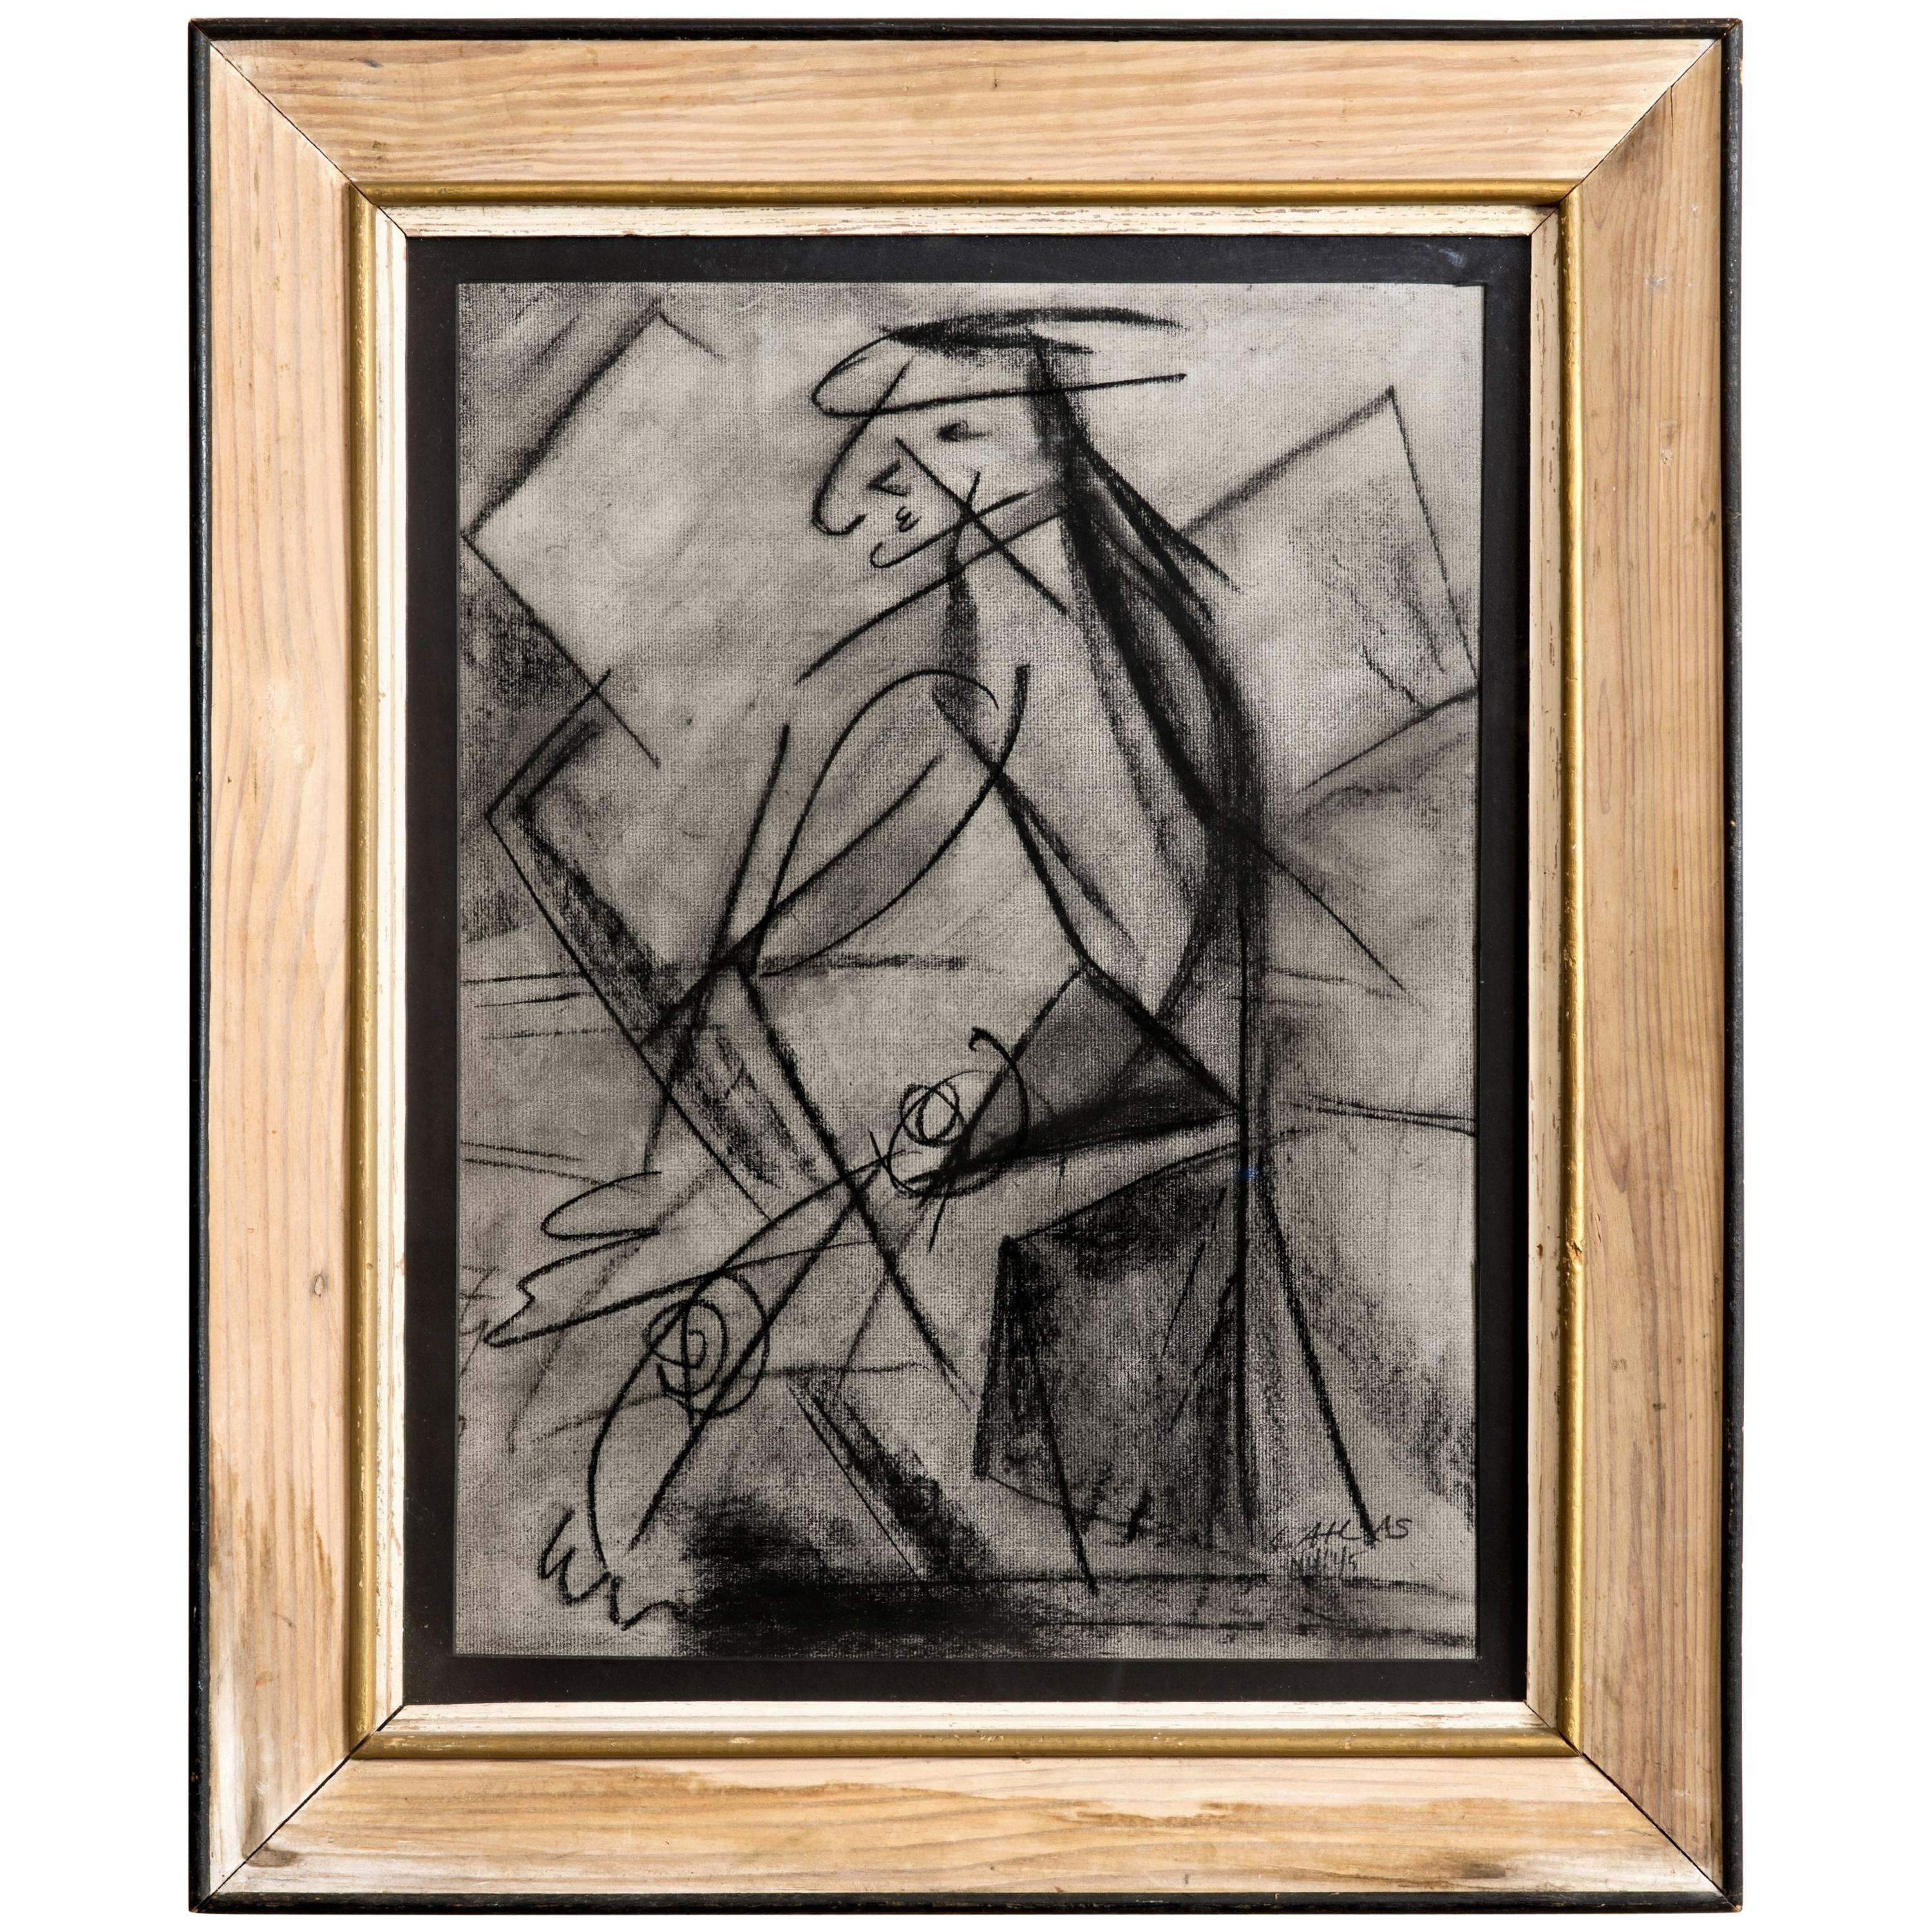 Charcoal Figural Drawing circa 1945 by Louis Atlas